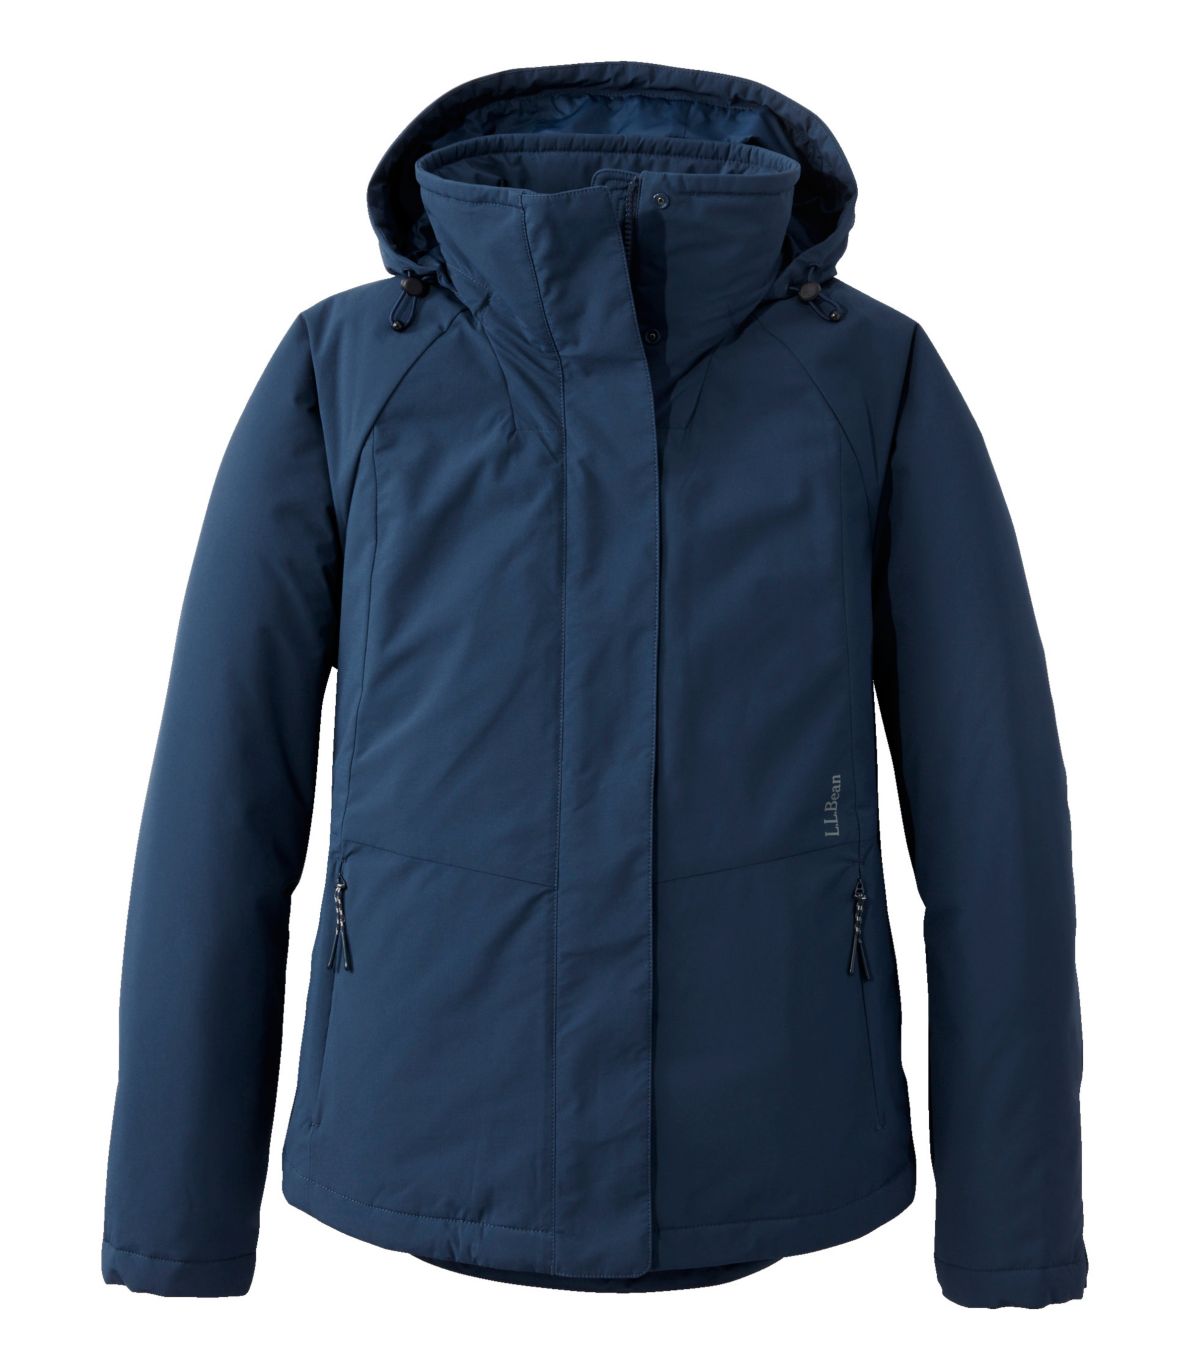 Women's Back Bay Insulated Jacket